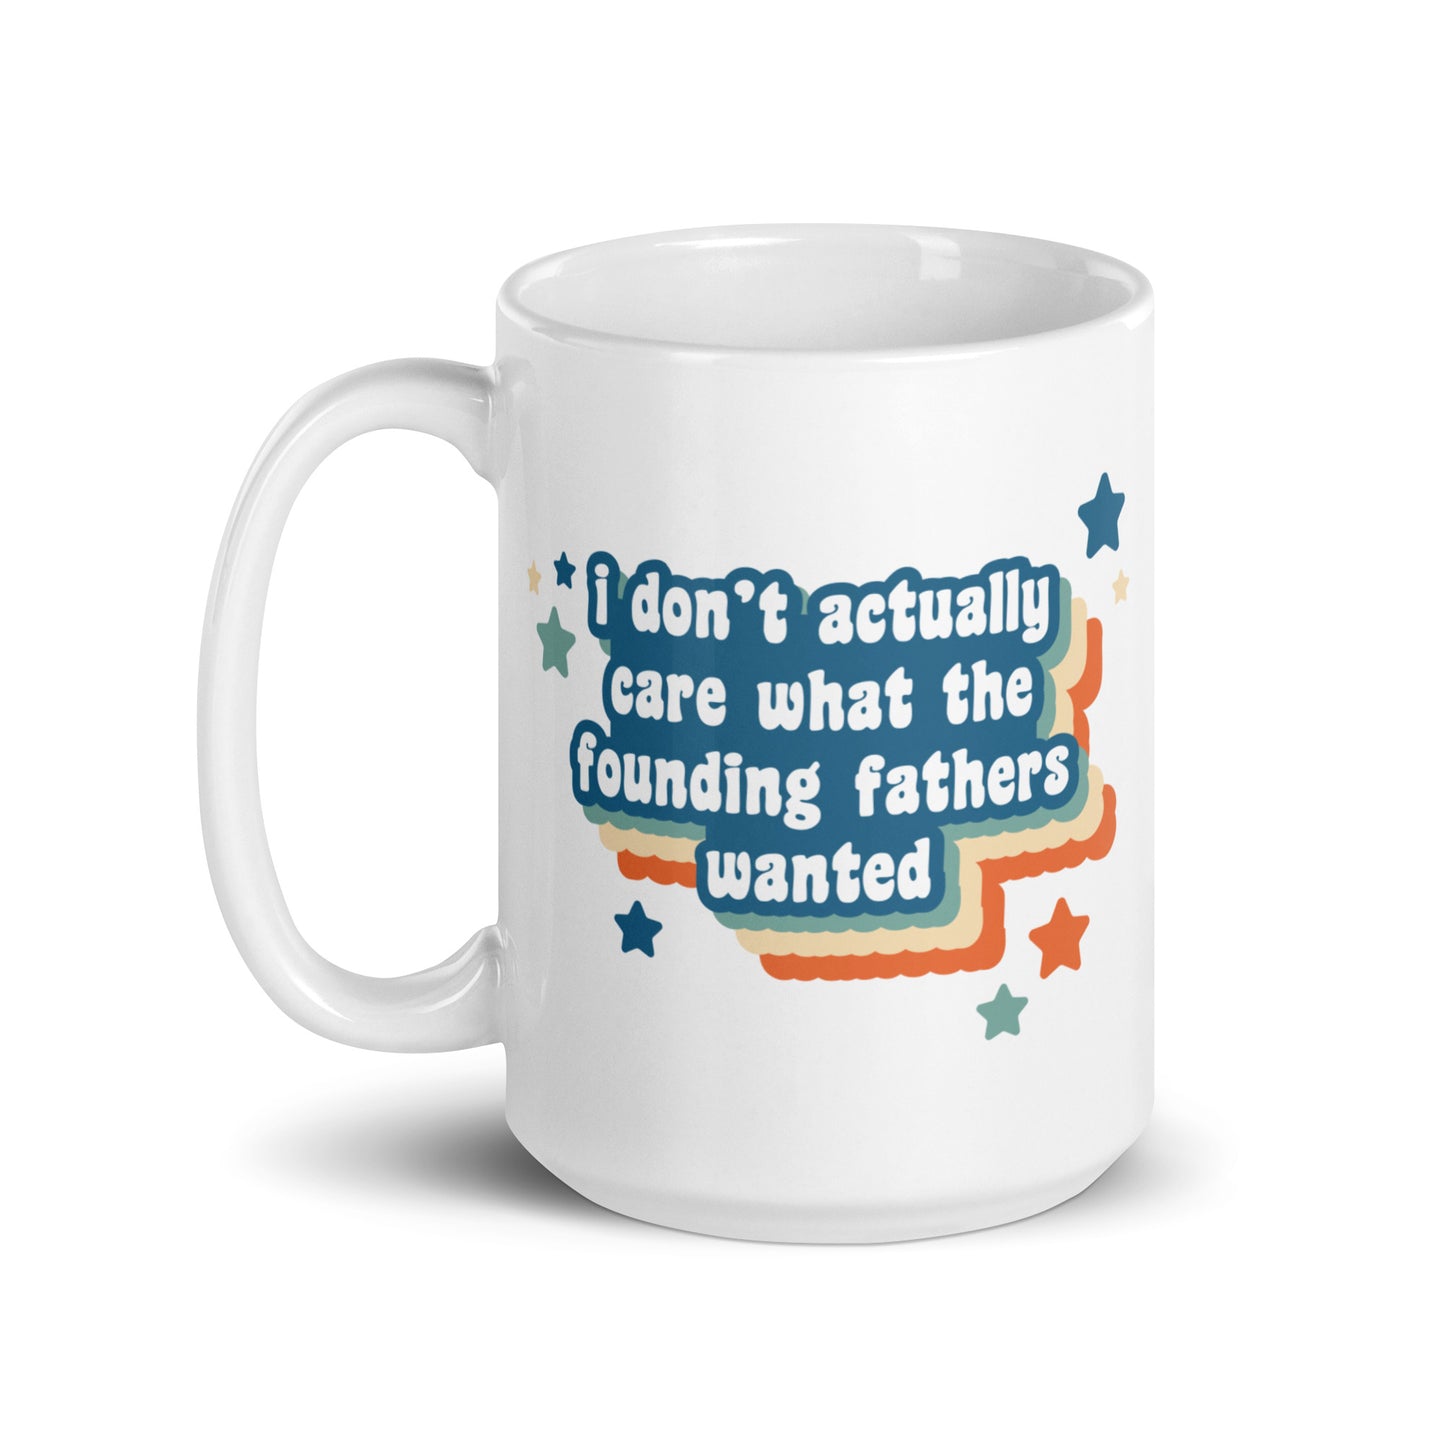 A white 15oz ceramic mug featuring text that reads "I don't actually care what the founding fathers wanted". Stars and a colorful drop shadow surround the text.